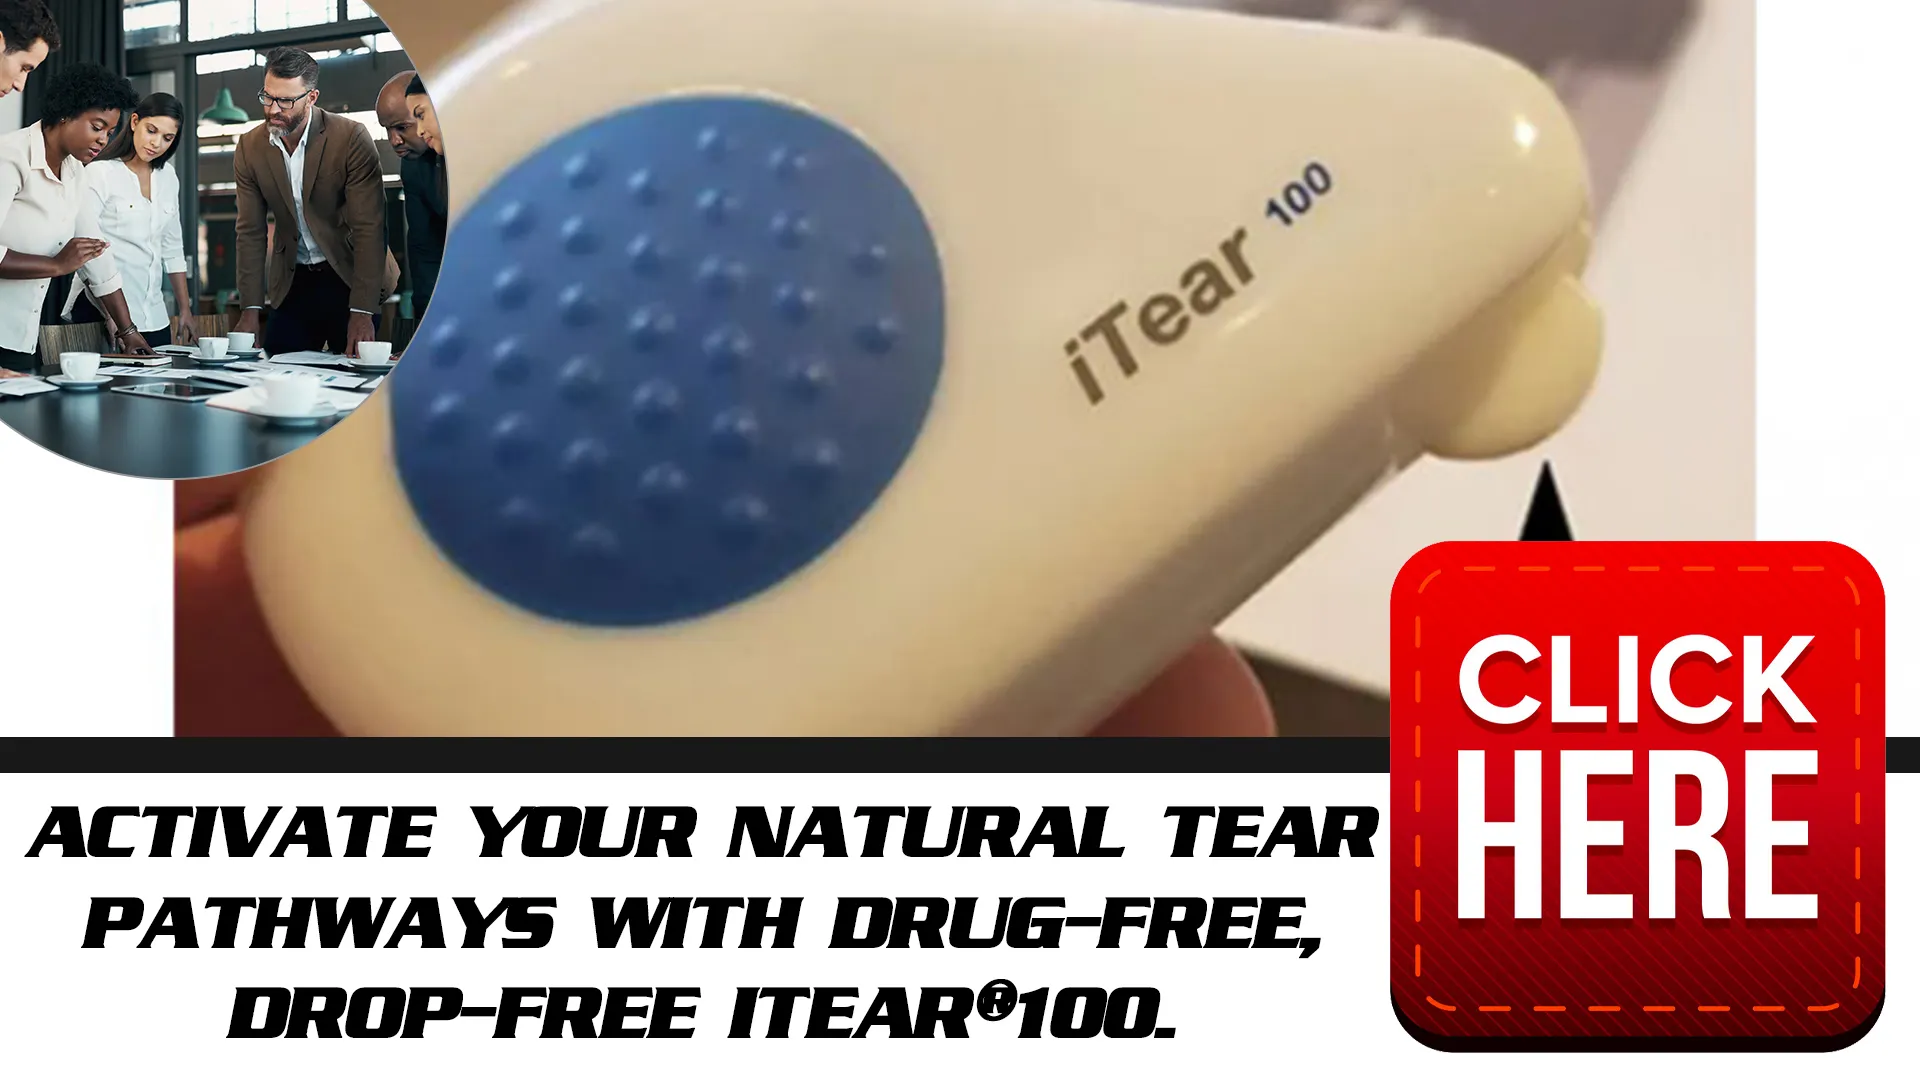 The iTEAR100: The Future of Dry Eye Relief